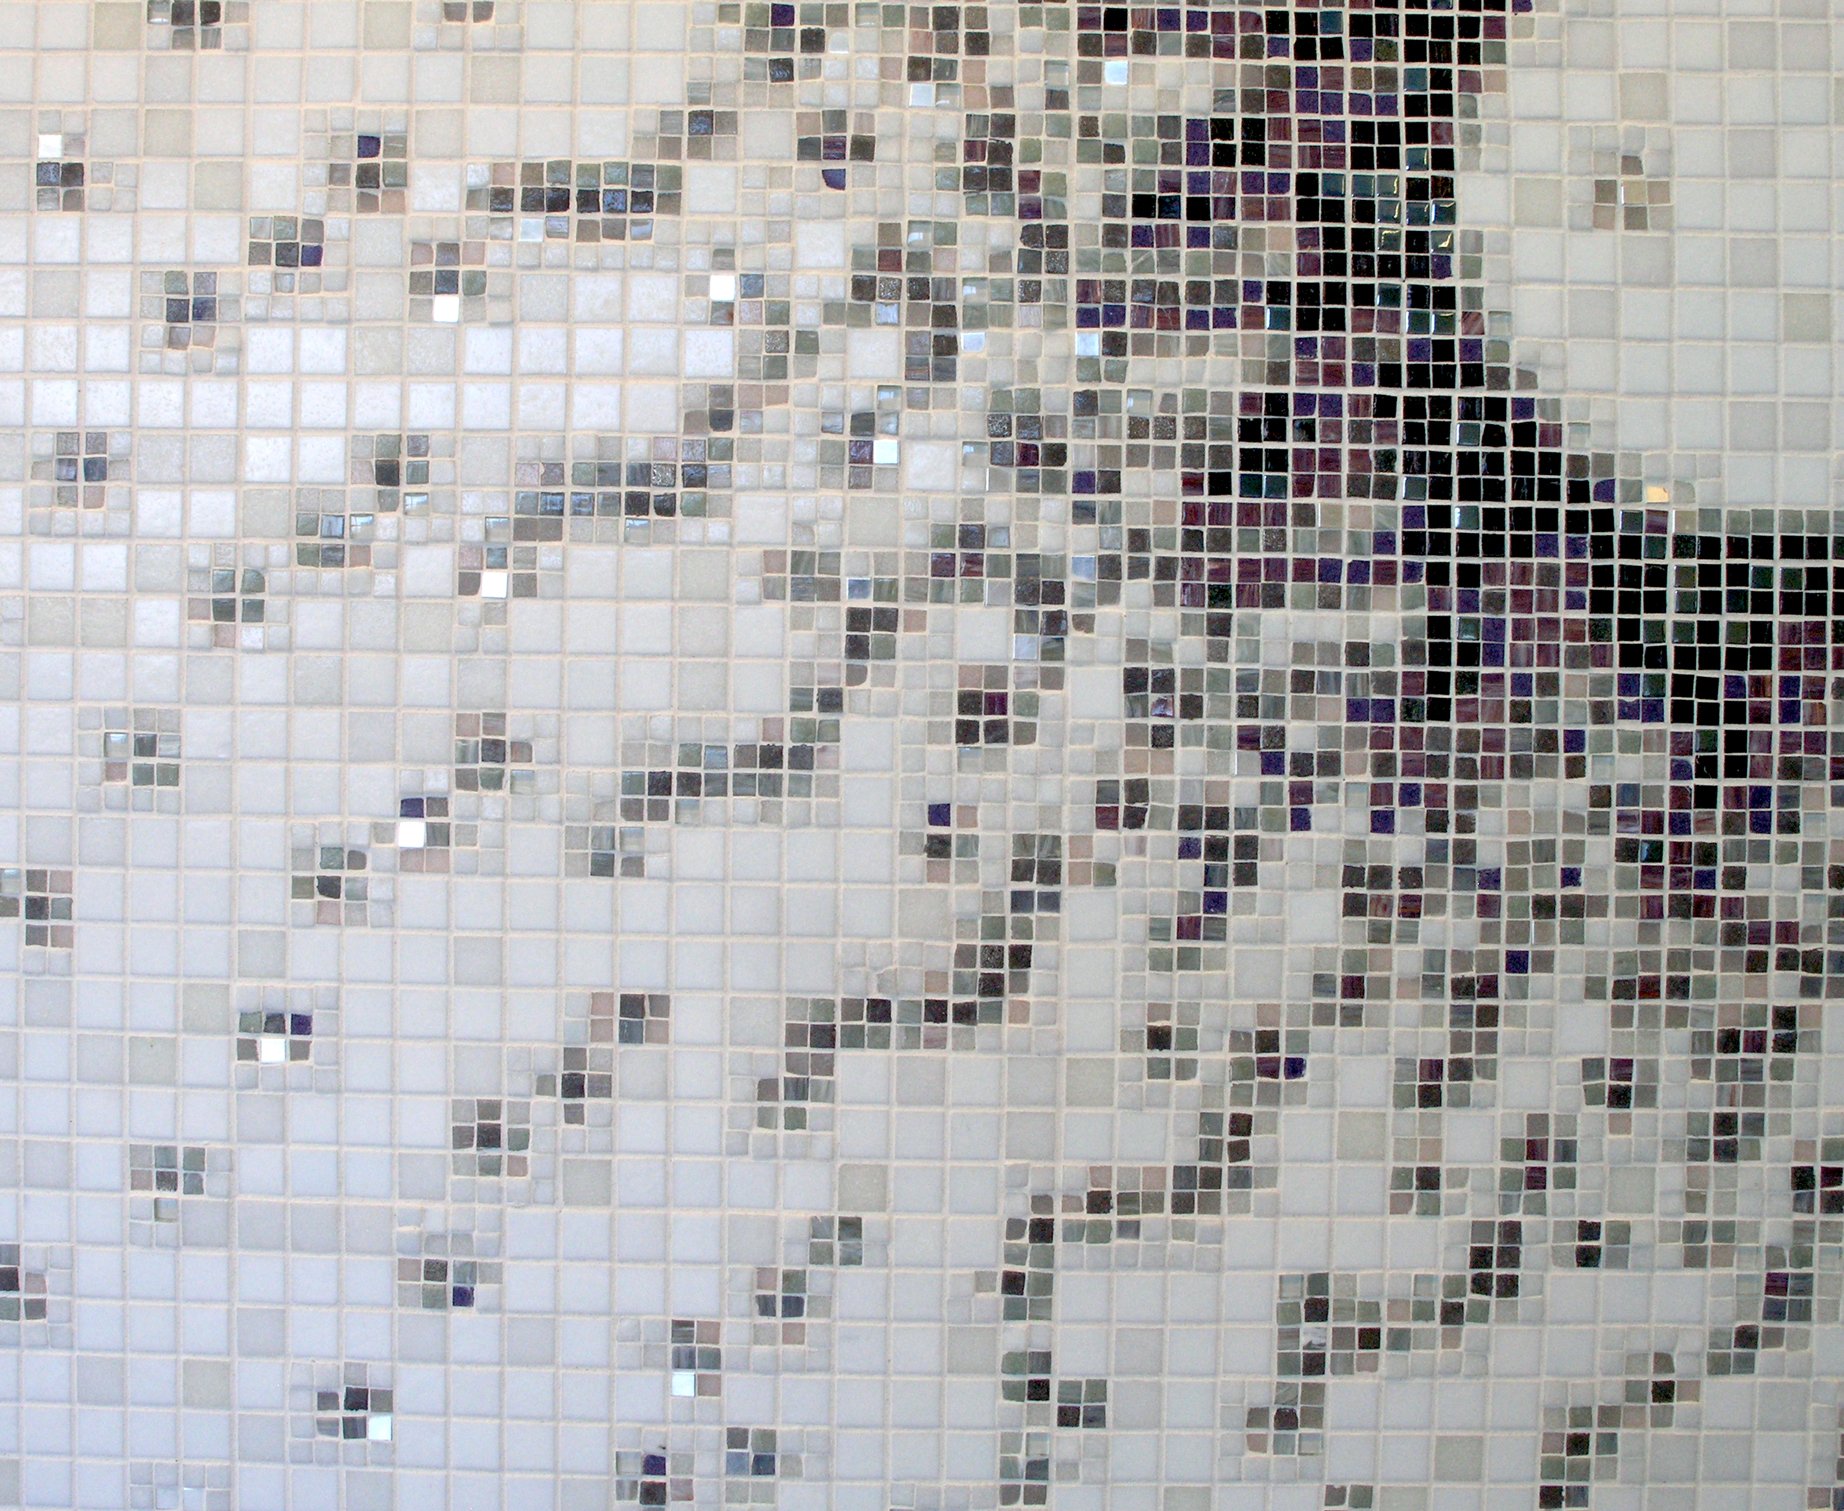  First Floor Wall, Glass tile mosaic, 11' x 16', 2010, Victor Schrager Photography 